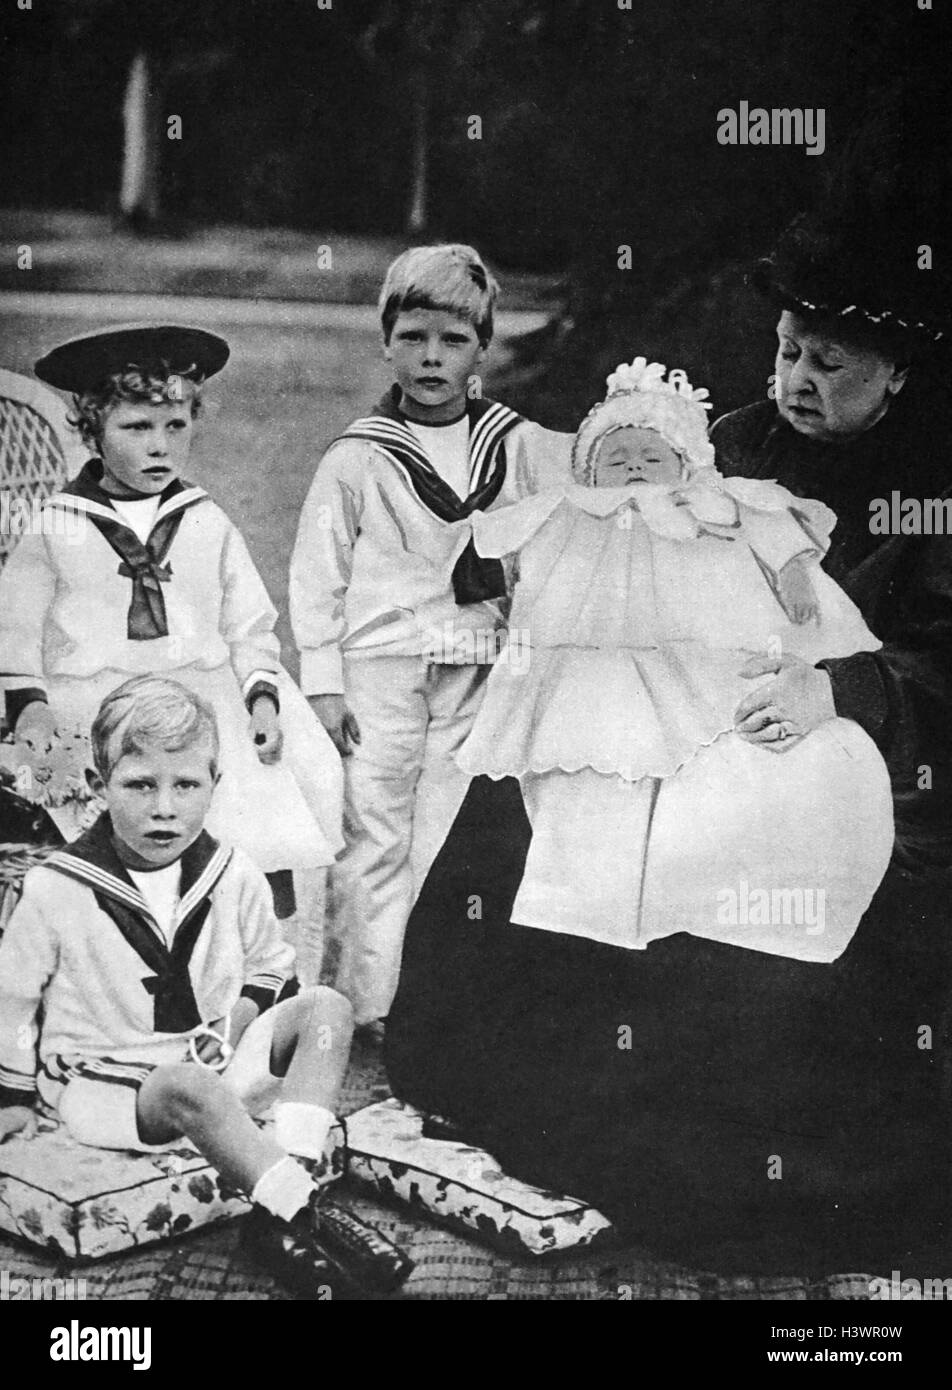 Photograph of Queen Victoria (1819-1901) with some of her young Grandchildren including; Prince Albert (later King George VI), Princess Victoria, Prince Edward (later King Edward VIII) and Prince Henry. Dated 20th Century Stock Photo